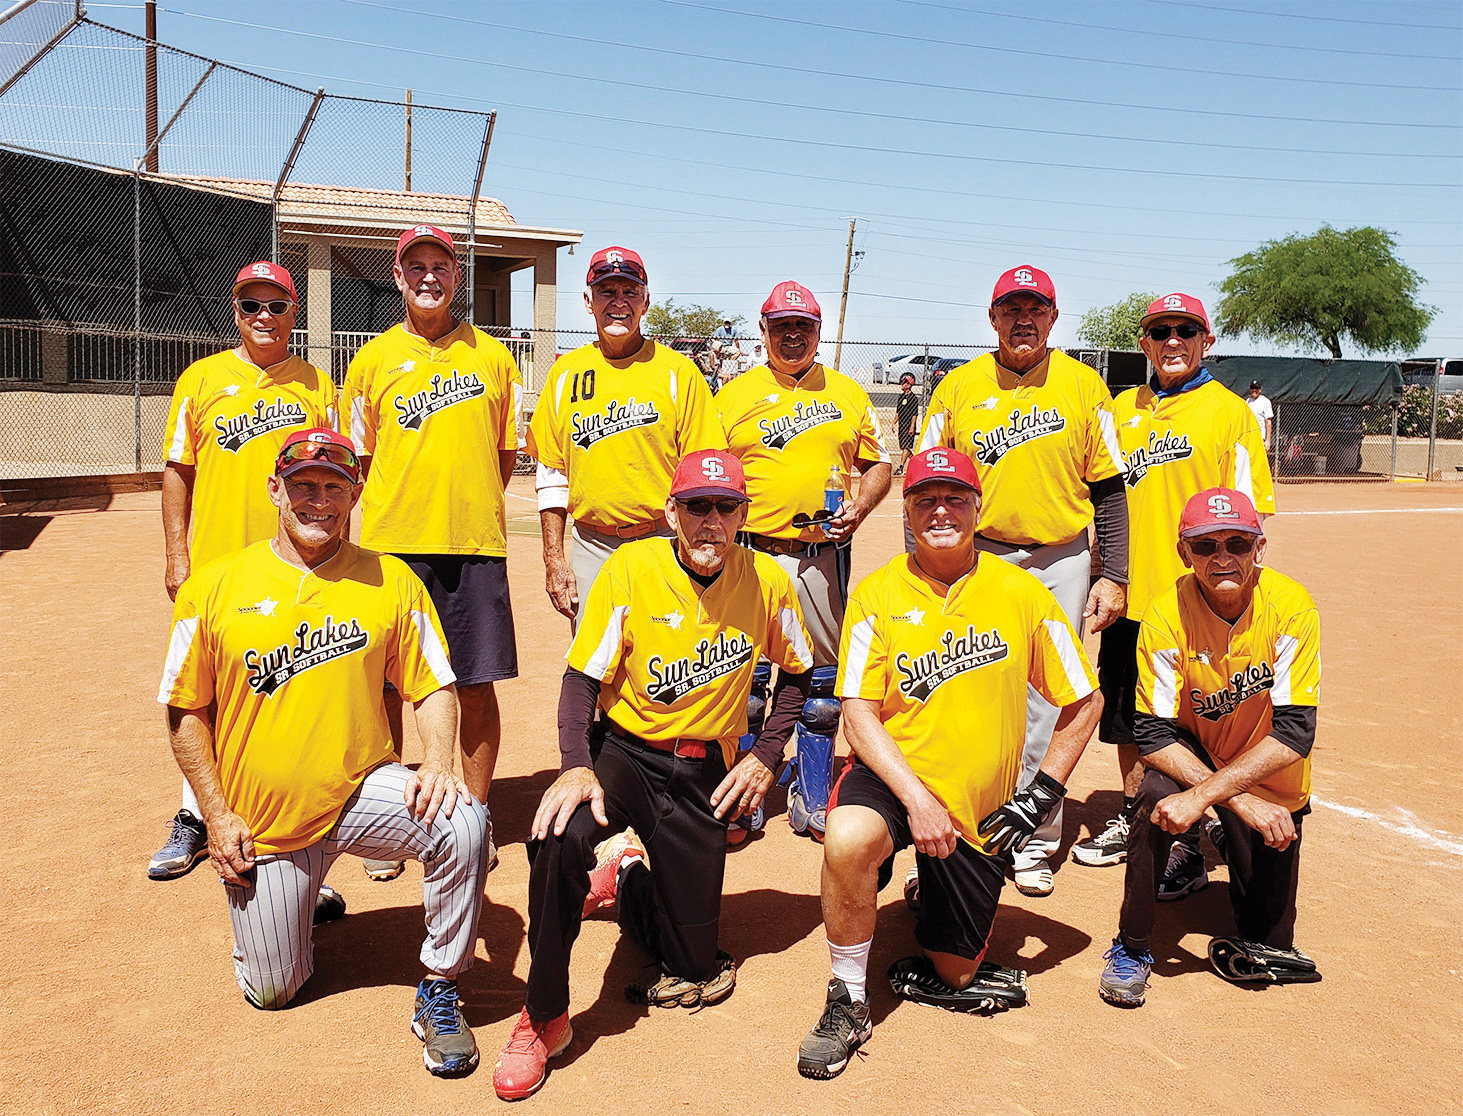 The Champs: Front (kneeling, left to right): Jon Hendrikse, Paul Gayer, Bob Reed, and Rick Oien. Back (left to right): Sam Giordano, Tom Schneider, Dave Waibel, Randy Neumann, Marty Hobby, and Kelly Anderson